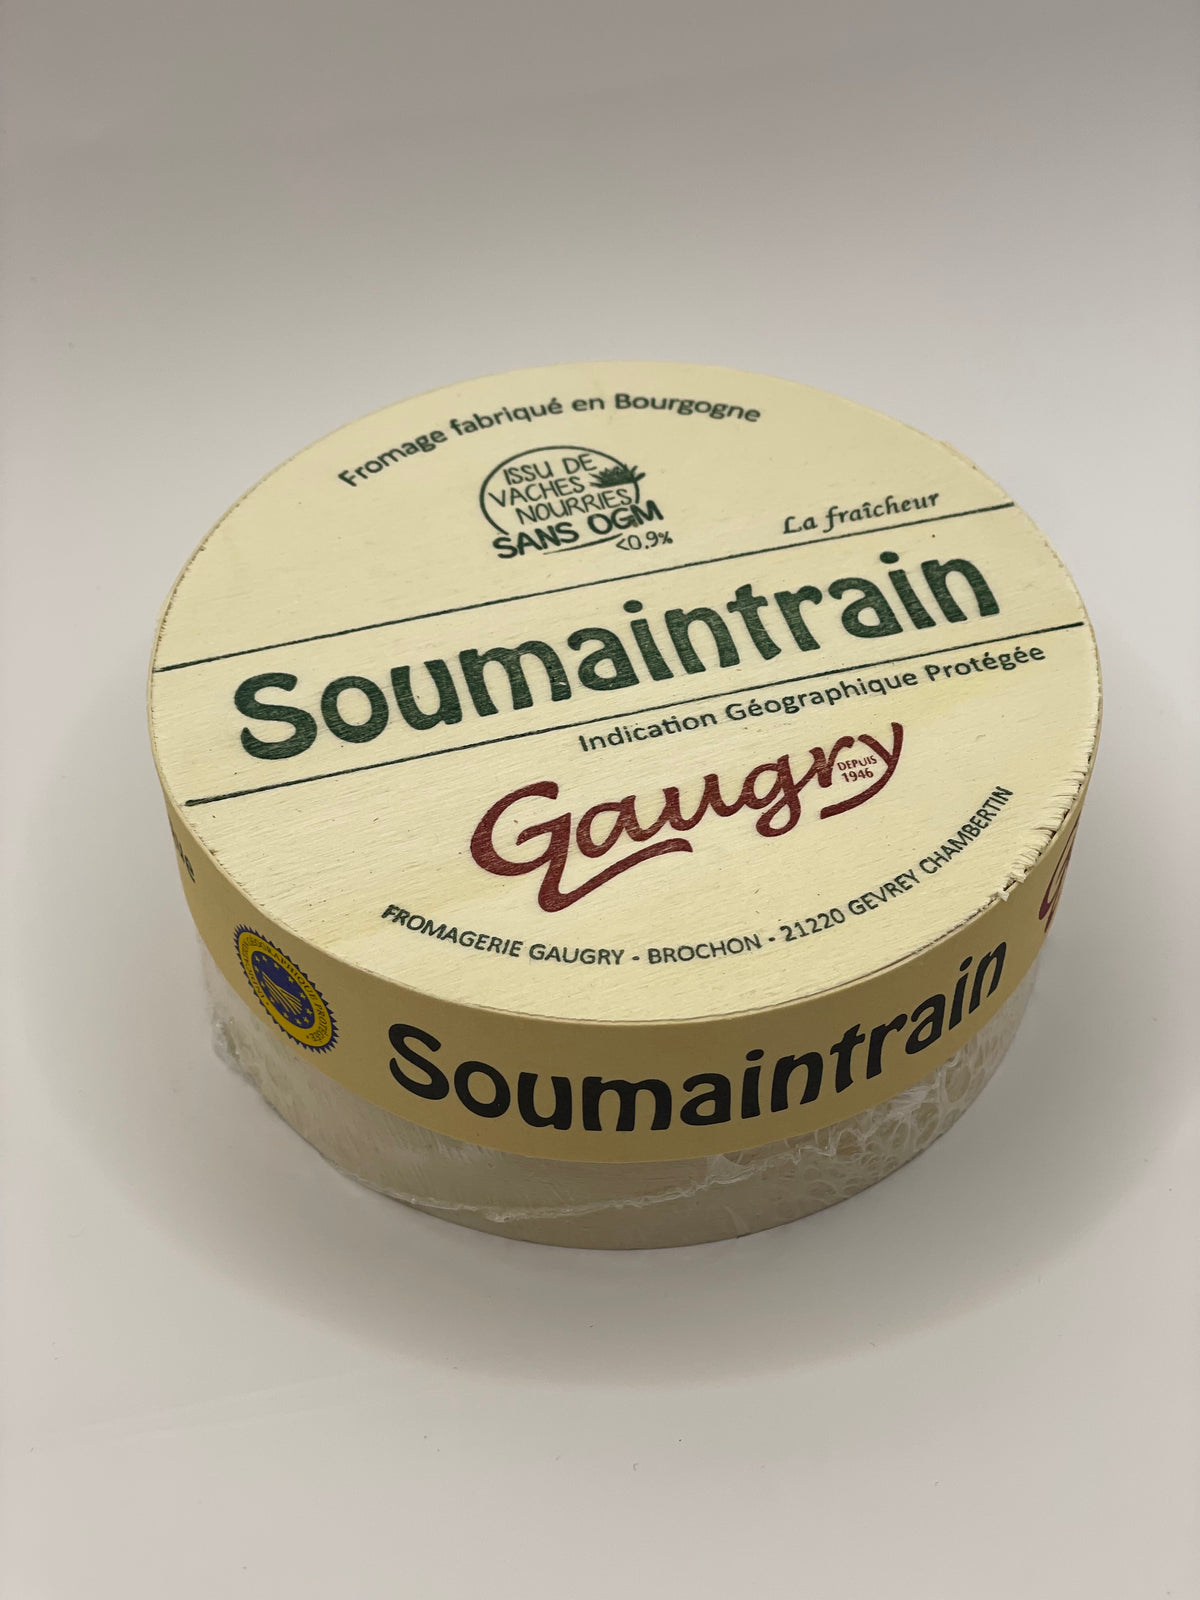 Soumaintrain “Fromagerie Gaugry”